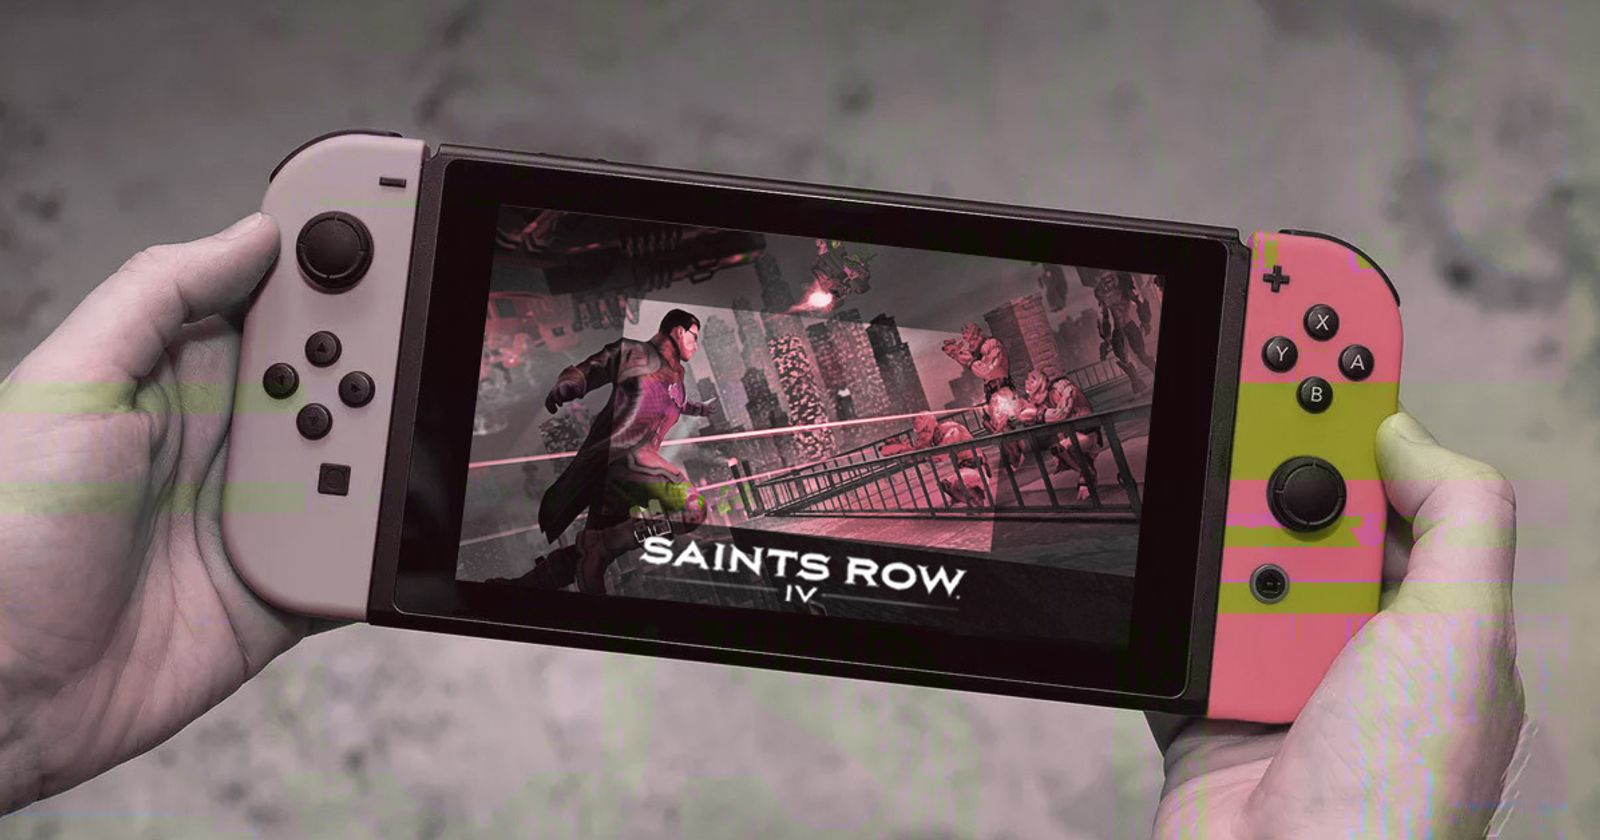  Saints Row IV: Re-Elected (Nintendo Switch) : Video Games